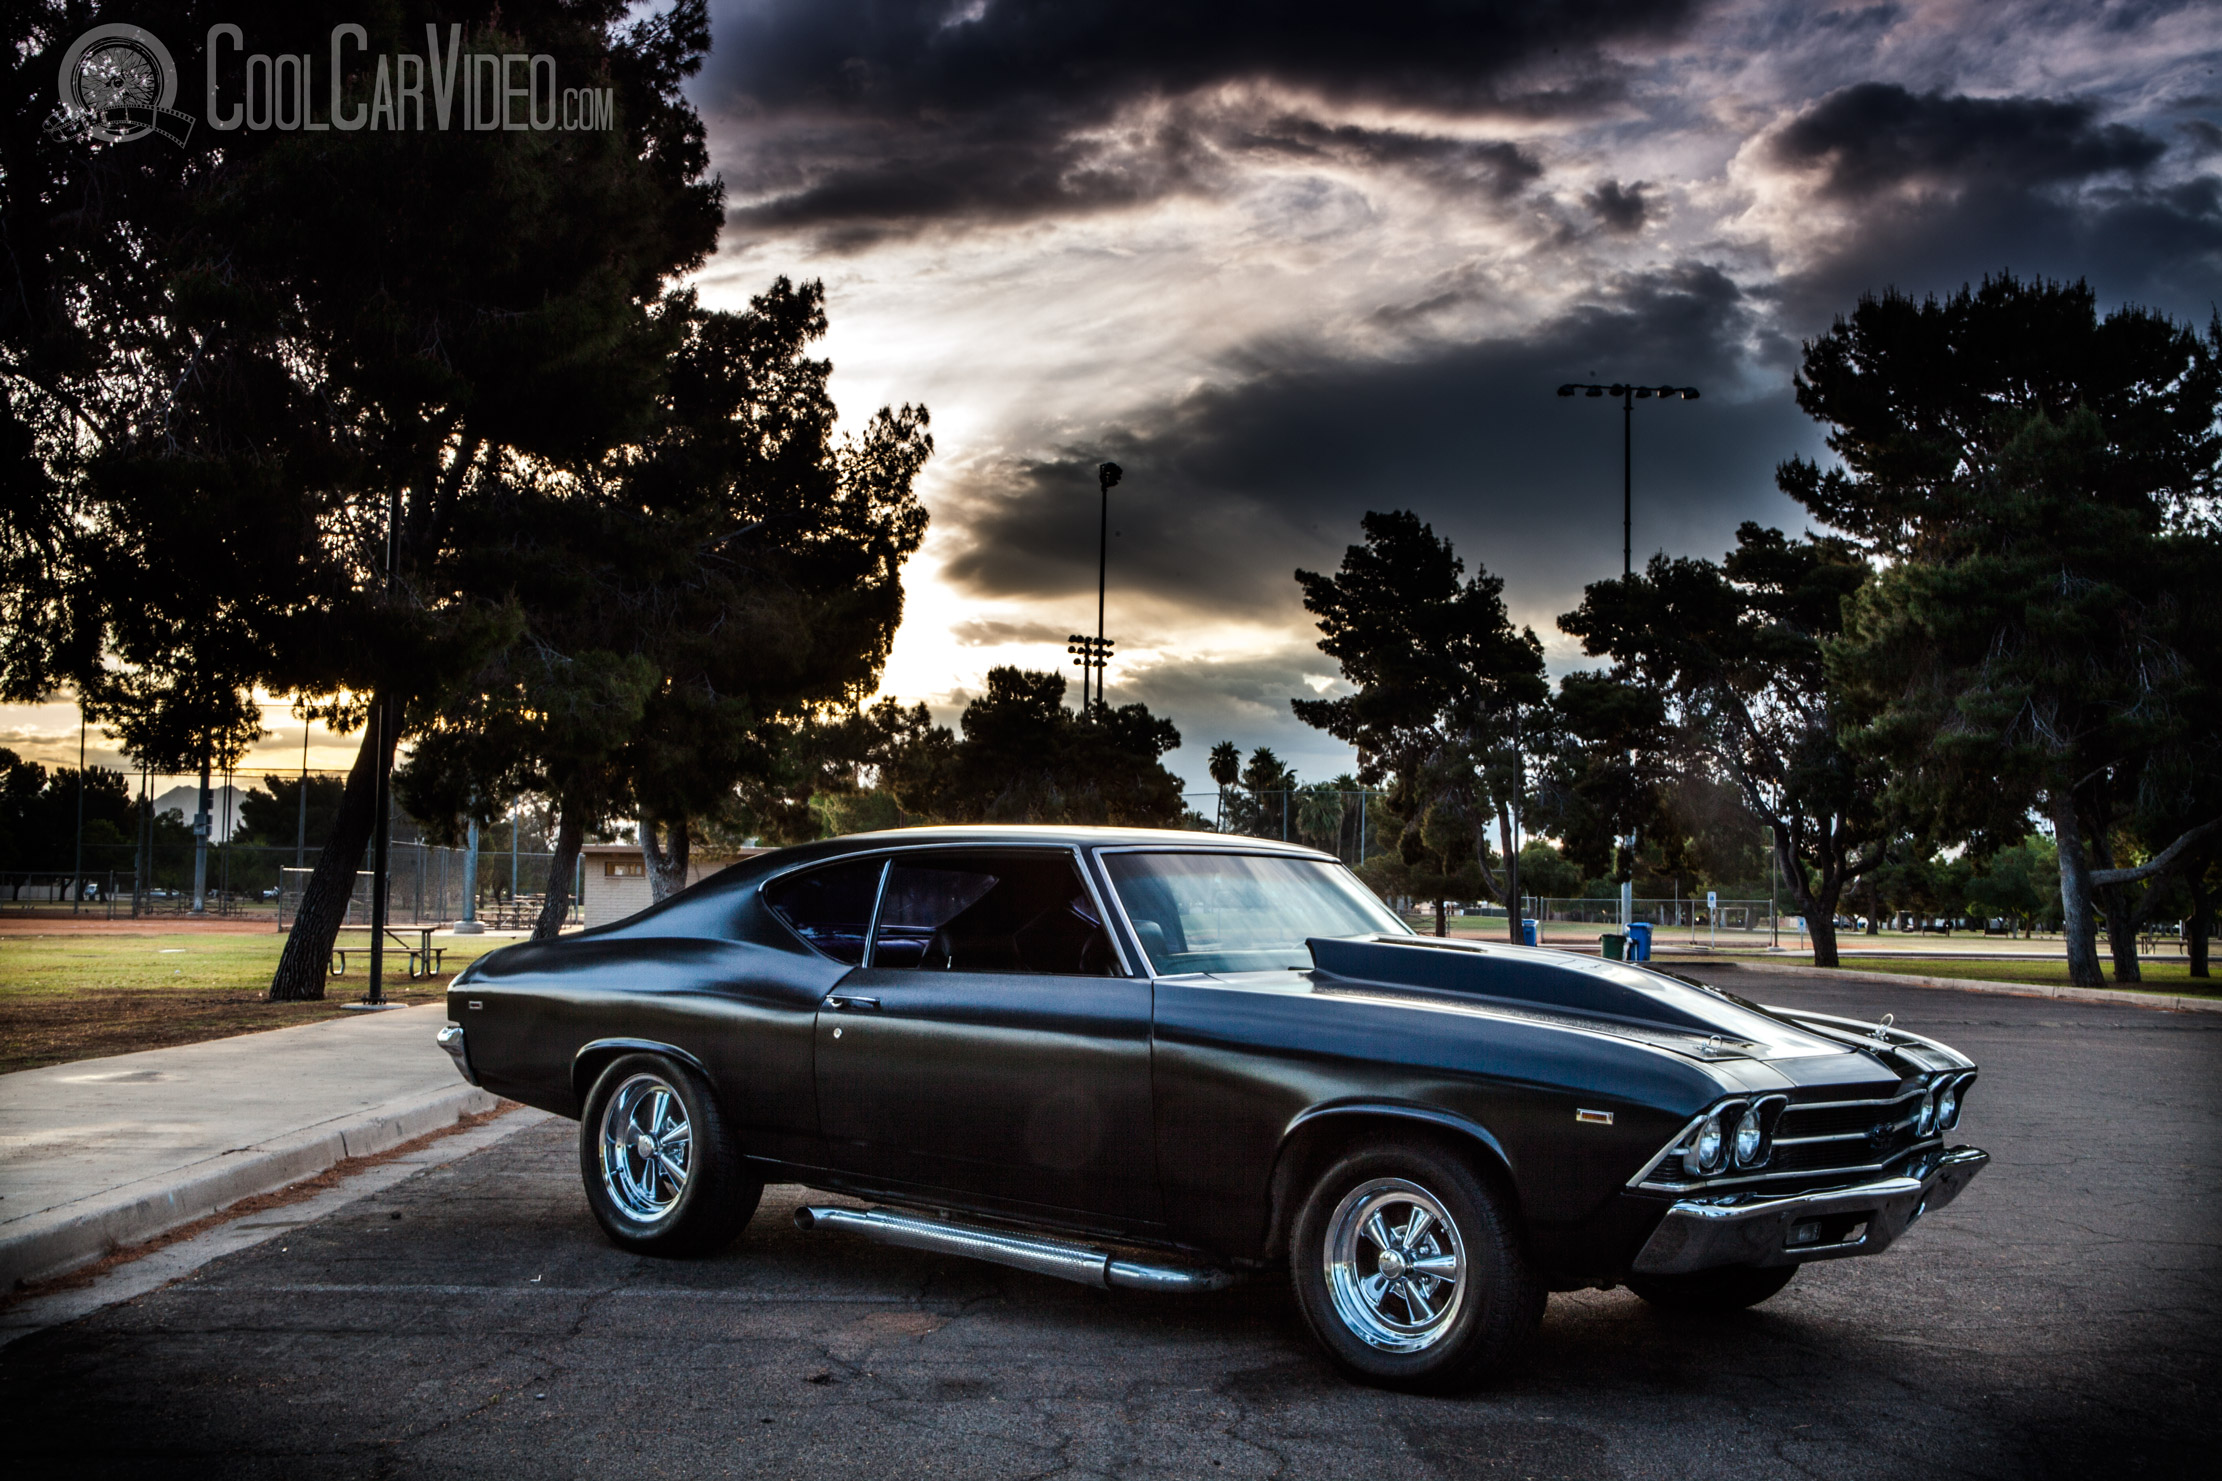 1969 Chevy Chevelle SS with swapped 454 engine Added to that there is